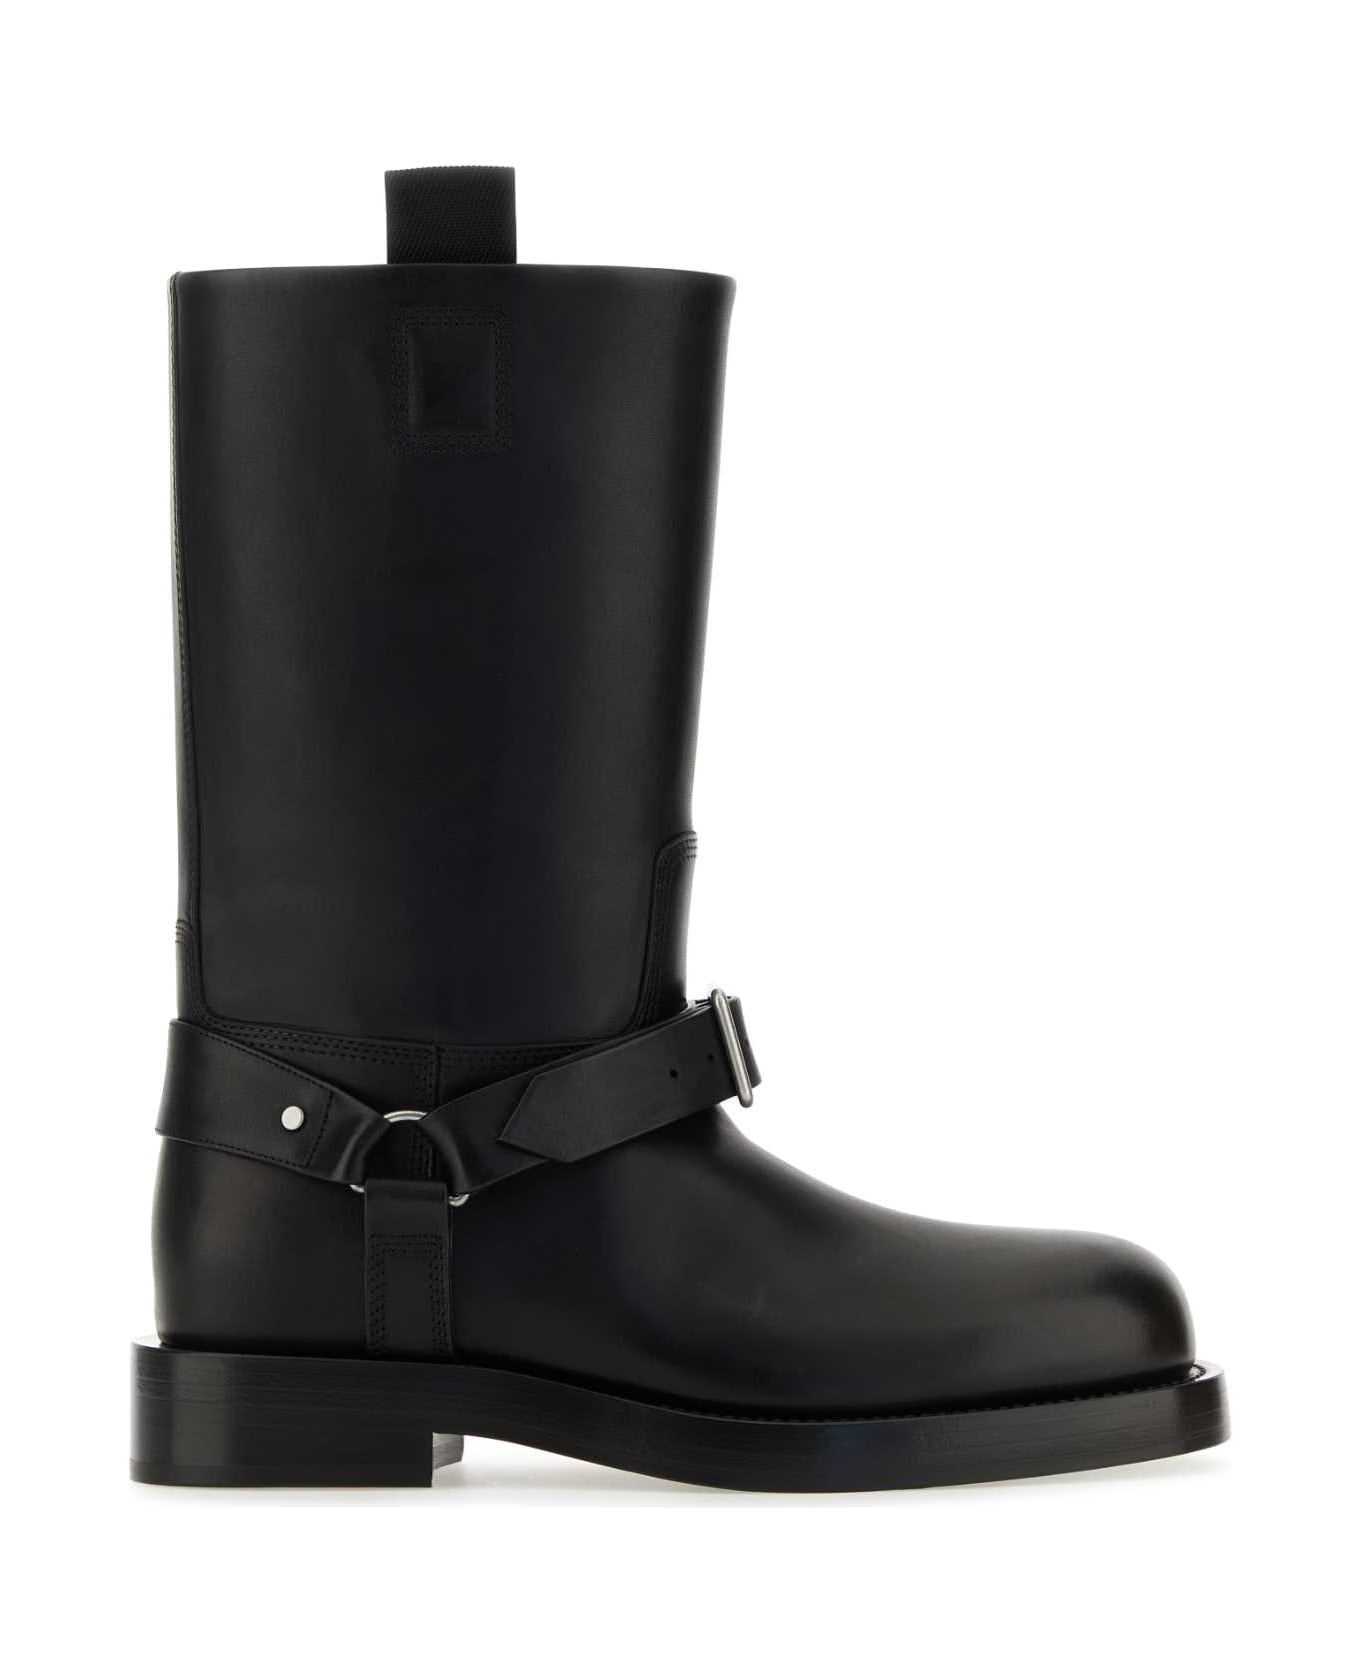 Burberry Black Leather Ankle Boots - BLACK